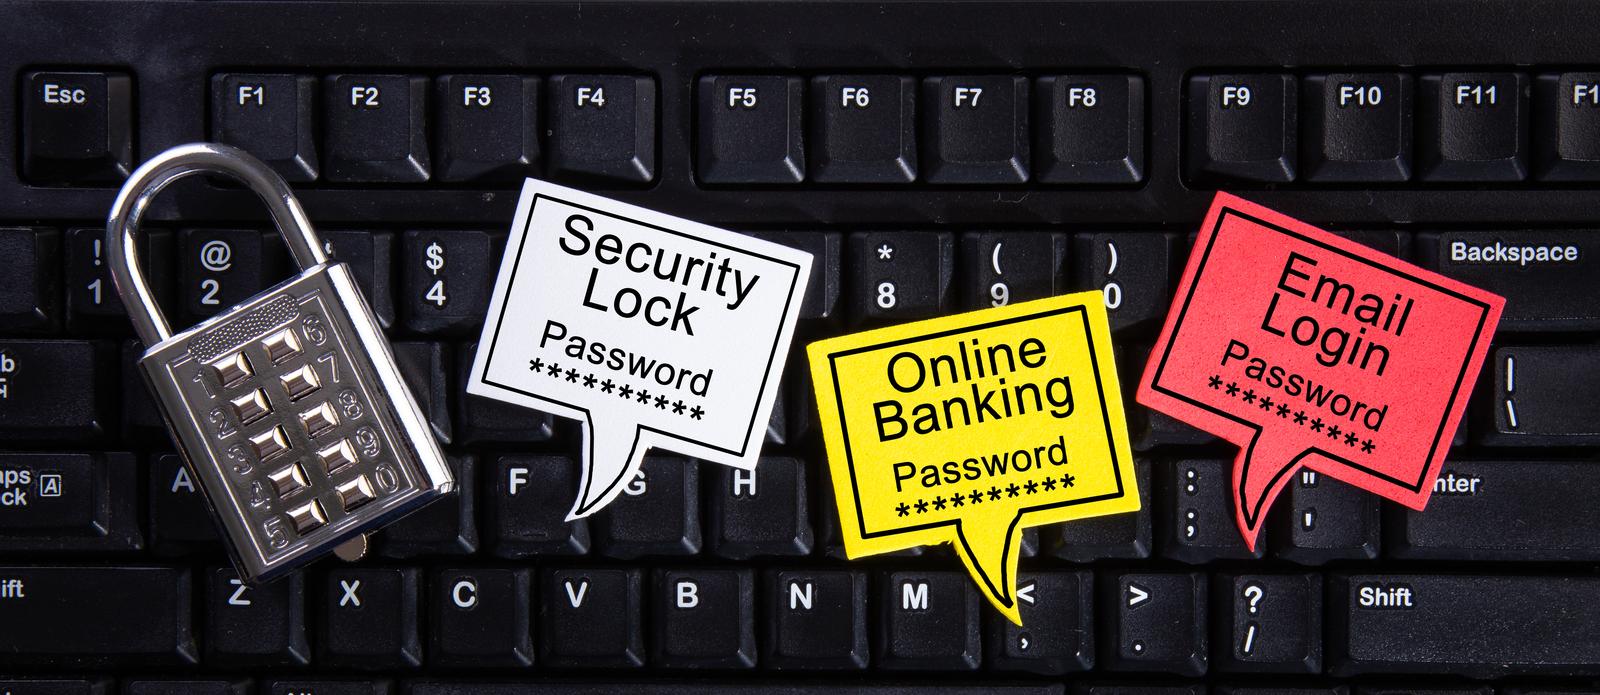 metal security lock, Online Banking and Email Login with password